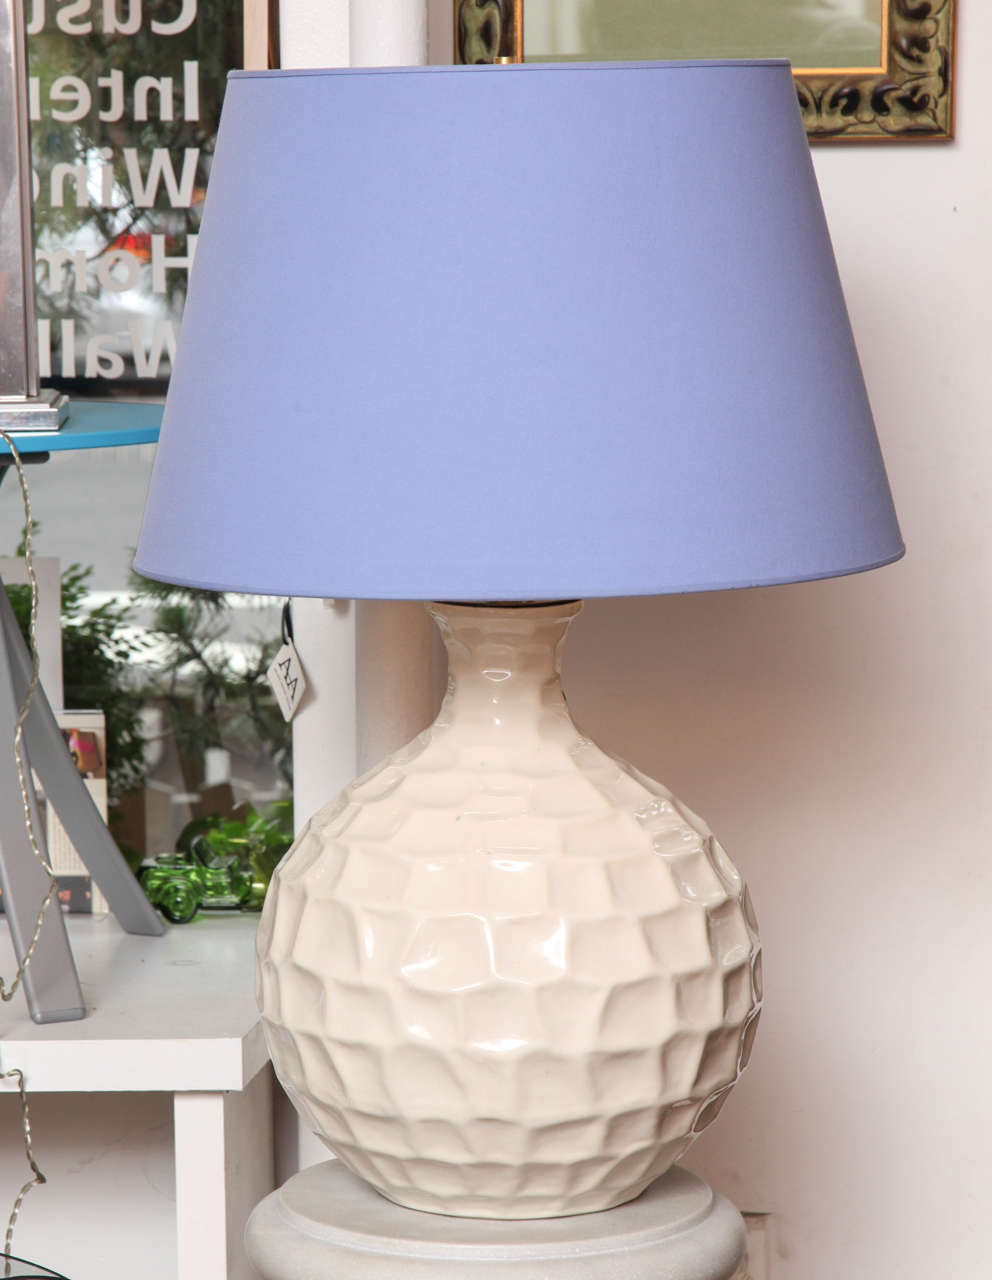 These cream porcelain table lamps are very chic and classy. They were updated with their contemporary purple linen shades. The shades are paper inside and linen outside. The shades measure 15.13